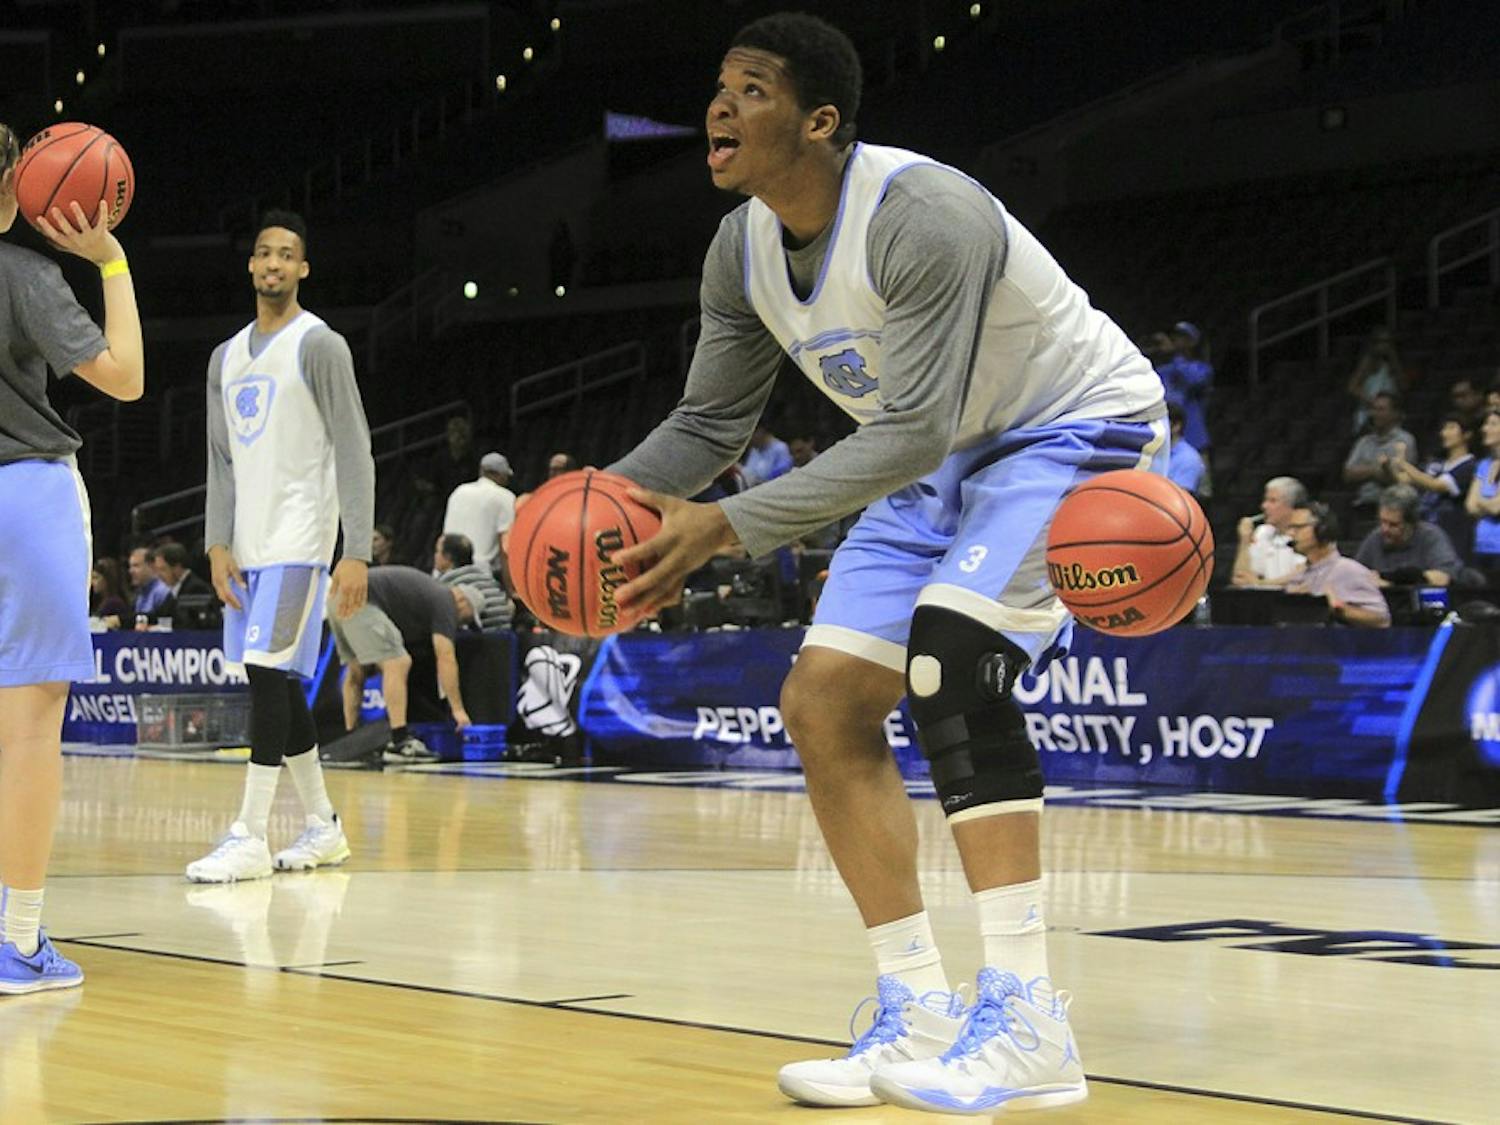 Sophomore forward Kennedy Meeks practices in Los Angeles ahead of the team’s Sweet 16 game against Wisconsin on Thursday night.